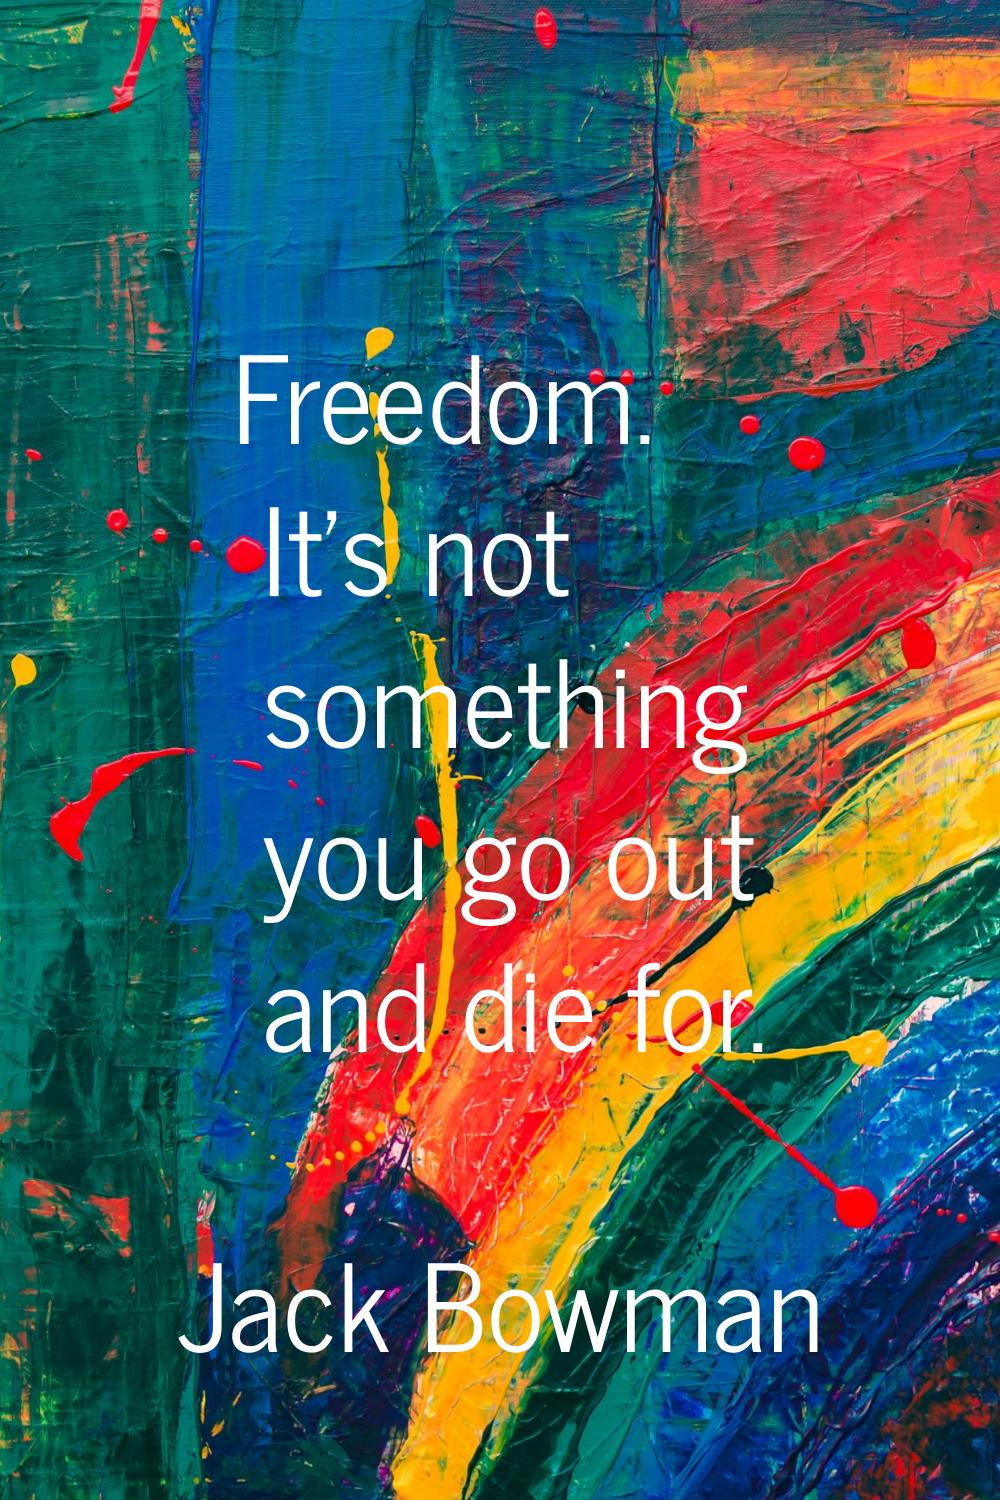 Freedom. It's not something you go out and die for.